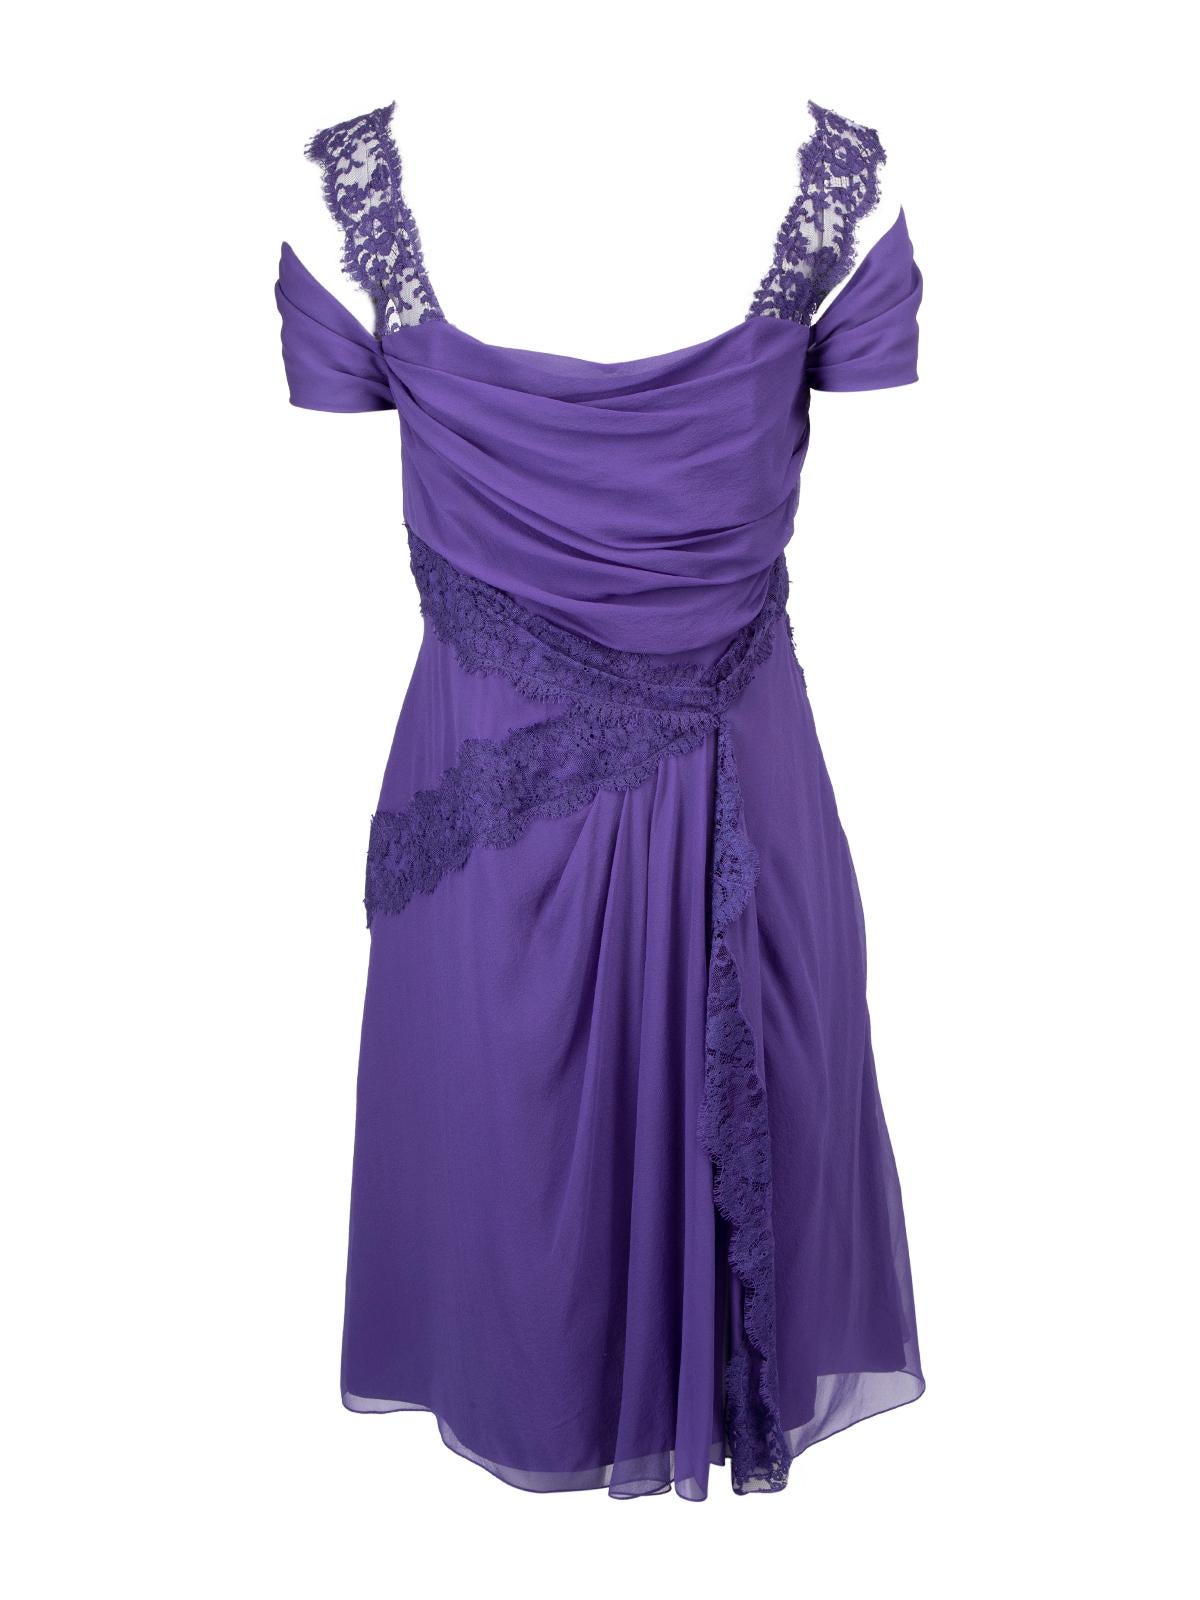 Pre-Loved Alberta Ferretti Women's Multi Layer Round Neck Dress with Lace Detail In Excellent Condition In London, GB